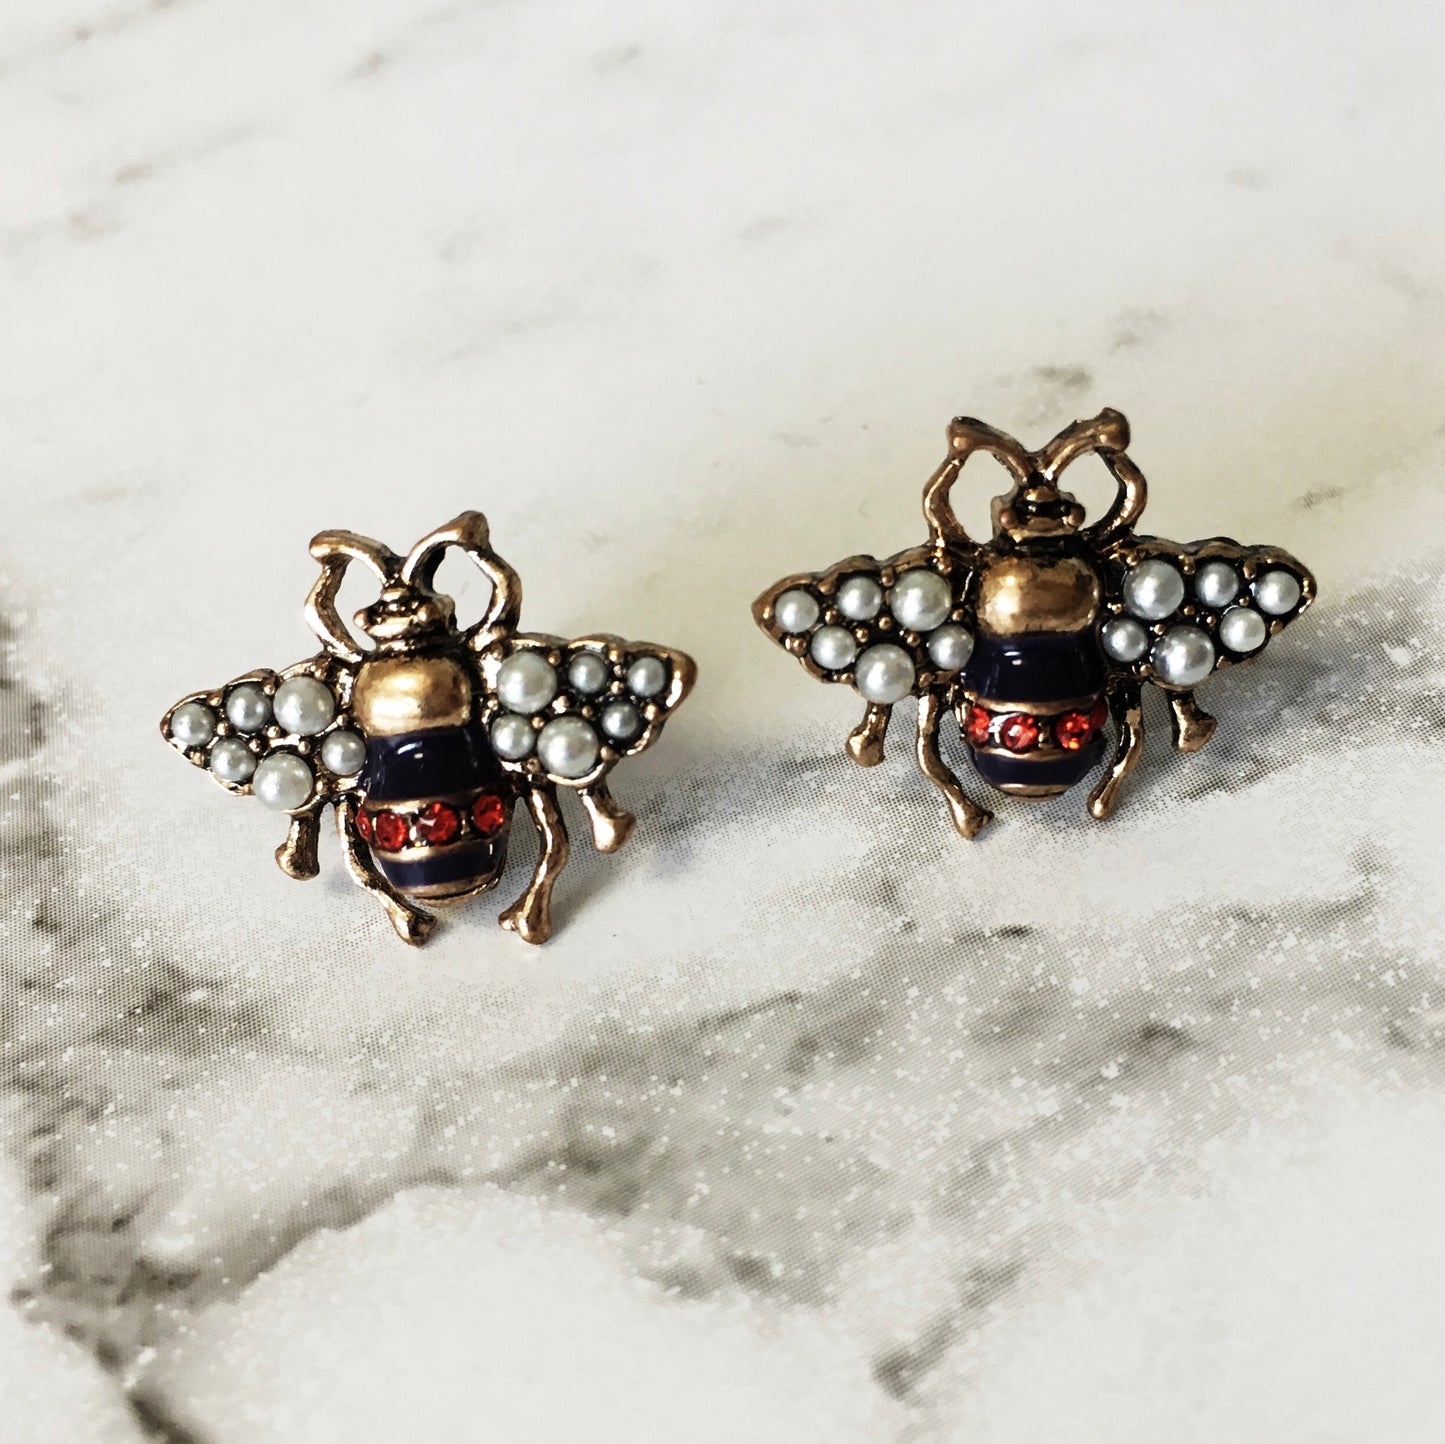 A small bug stud with a navy and red body, pearl encrusted wings and gold framing. The detailing on these little bugs is just gorgeous. 